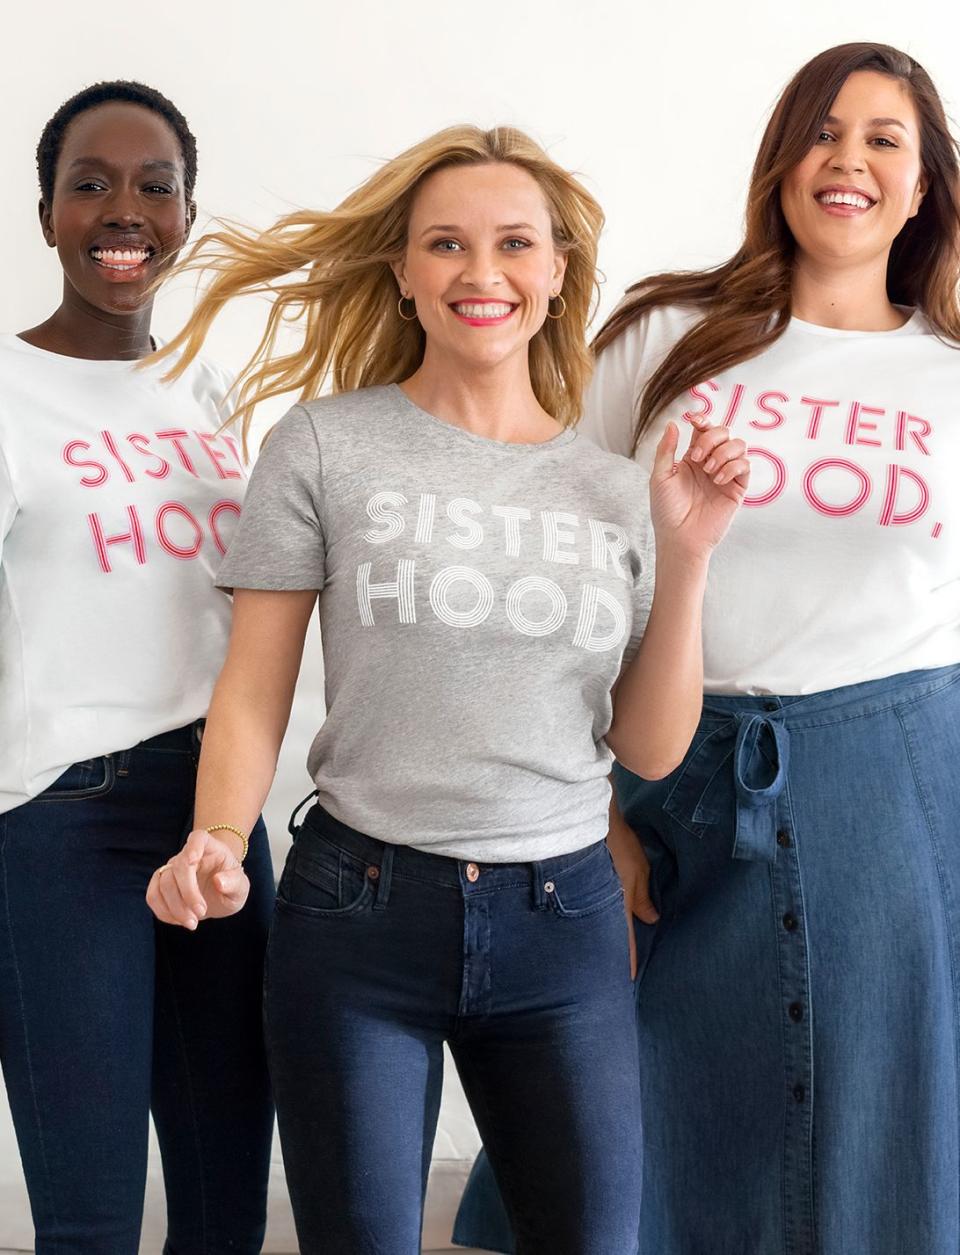 On Friday, Draper James is donating 25 percent of profits from the Sisterhood Collection to Girls Inc.&nbsp;<strong><a href="https://fave.co/2C2Qm9y" target="_blank" rel="noopener noreferrer">Find this T-shirt at Draper James for $38.</a></strong>